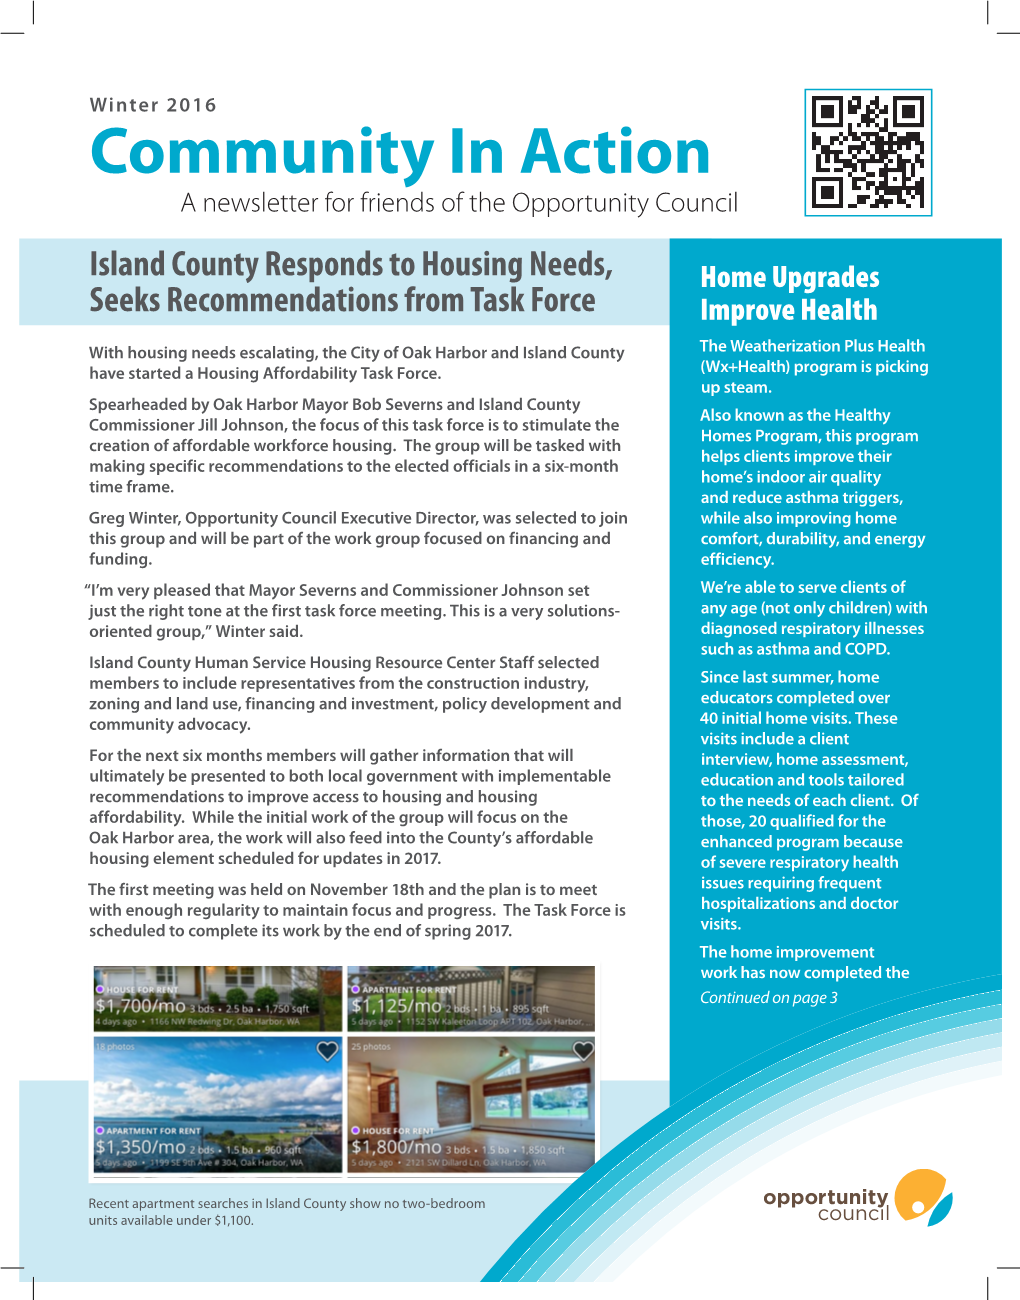 Community in Action a Newsletter for Friends of the Opportunity Council